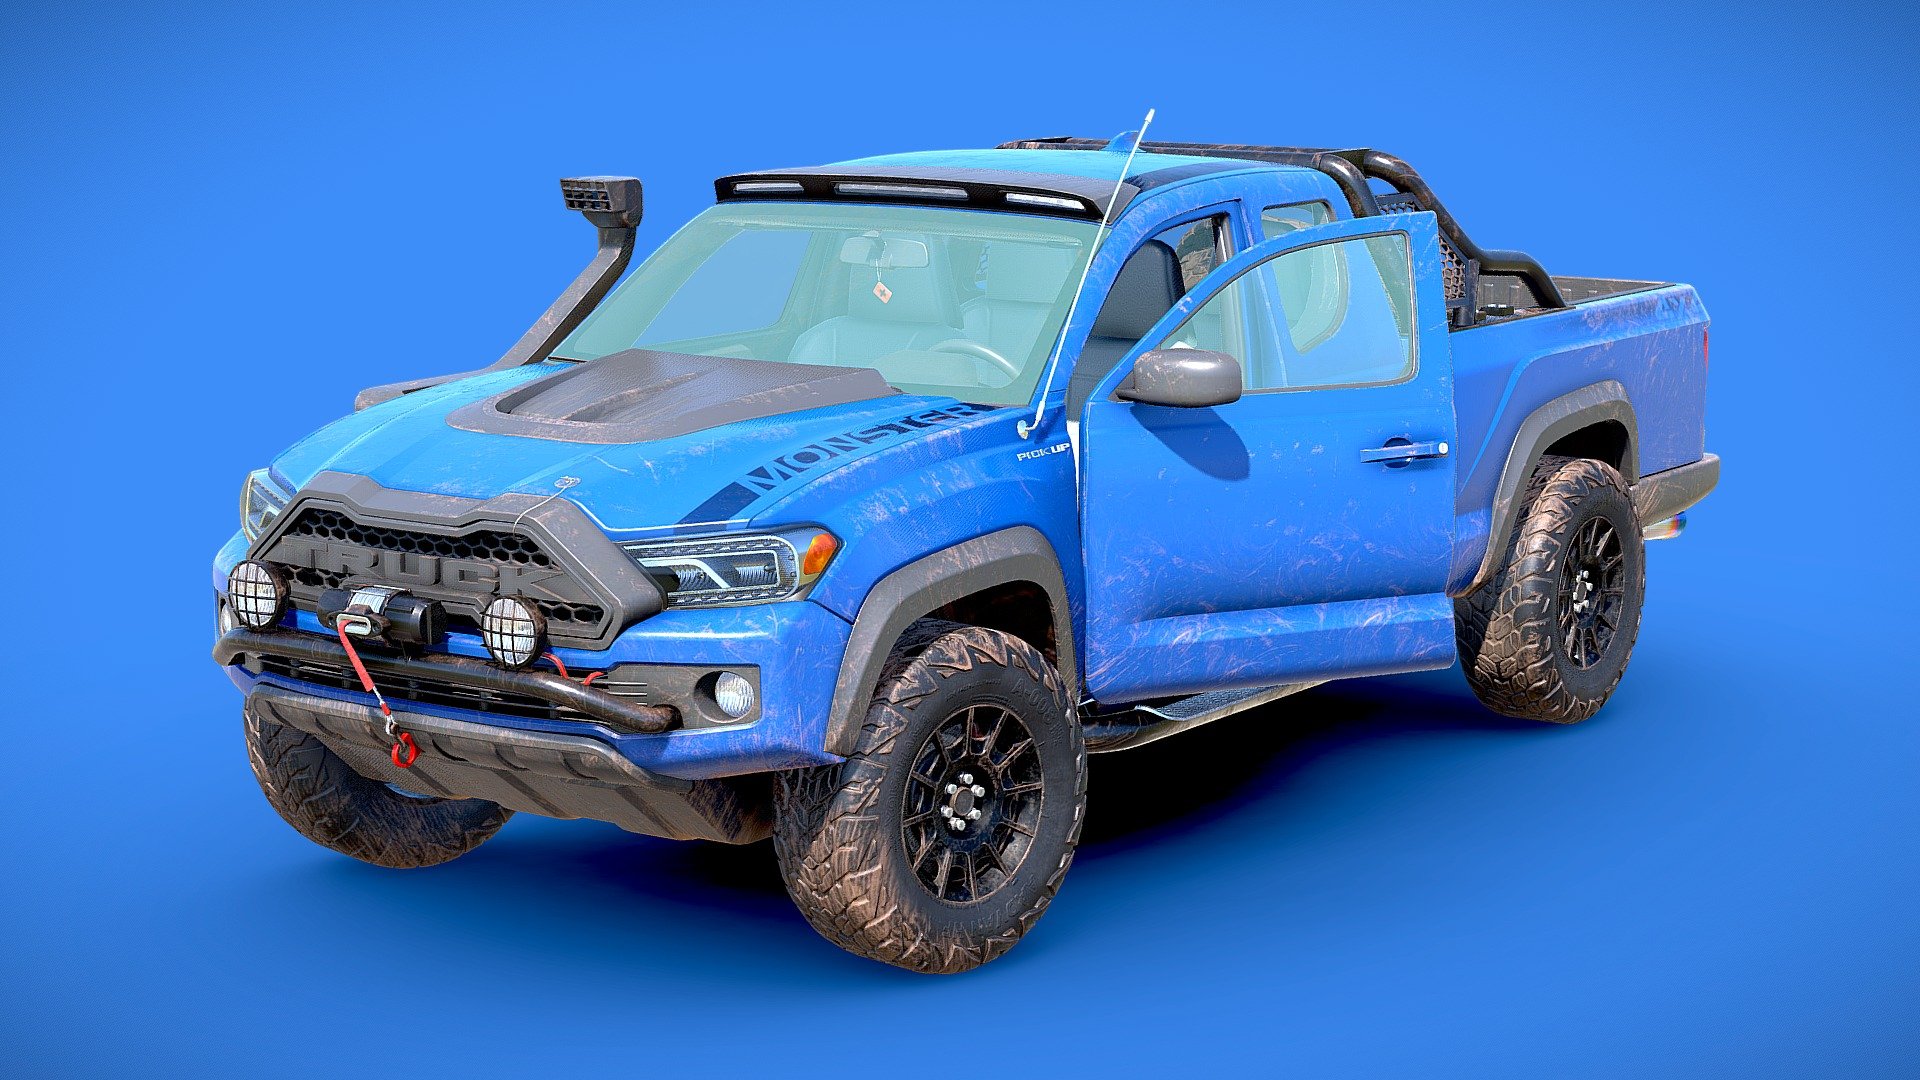 Generic Pickup Truck Lowpoly, 

Game Ready Vehicle with PBR Textures, the model has openable doors with a good interior, 

The mesh has 94k Polys,

it has 3 set of PBR textures, Body, Wheel and Lights, 

Body has a resolution of 4096x4096, and inlcudes BaseColor, Metallic, Roughness, Normal, AO and Emissive
Wheel has a resolution of 1024x1024 and includes BaseColor, Metallic, Roughness, Normal and AO
Lights has a resolution of 1024x1024 and includes BaseColor, Metallic, Roughness, Normal and Opacity

The model has an average Texel Density of 480px/m

All objects has their pivot placed propperly so it can be easily animated

it is made in real world size,  2,1 meters of width,   5,5 meter long and 1,9 meter height - Generic Pickup Truck Lowpoly - Buy Royalty Free 3D model by rfarencibia 3d model